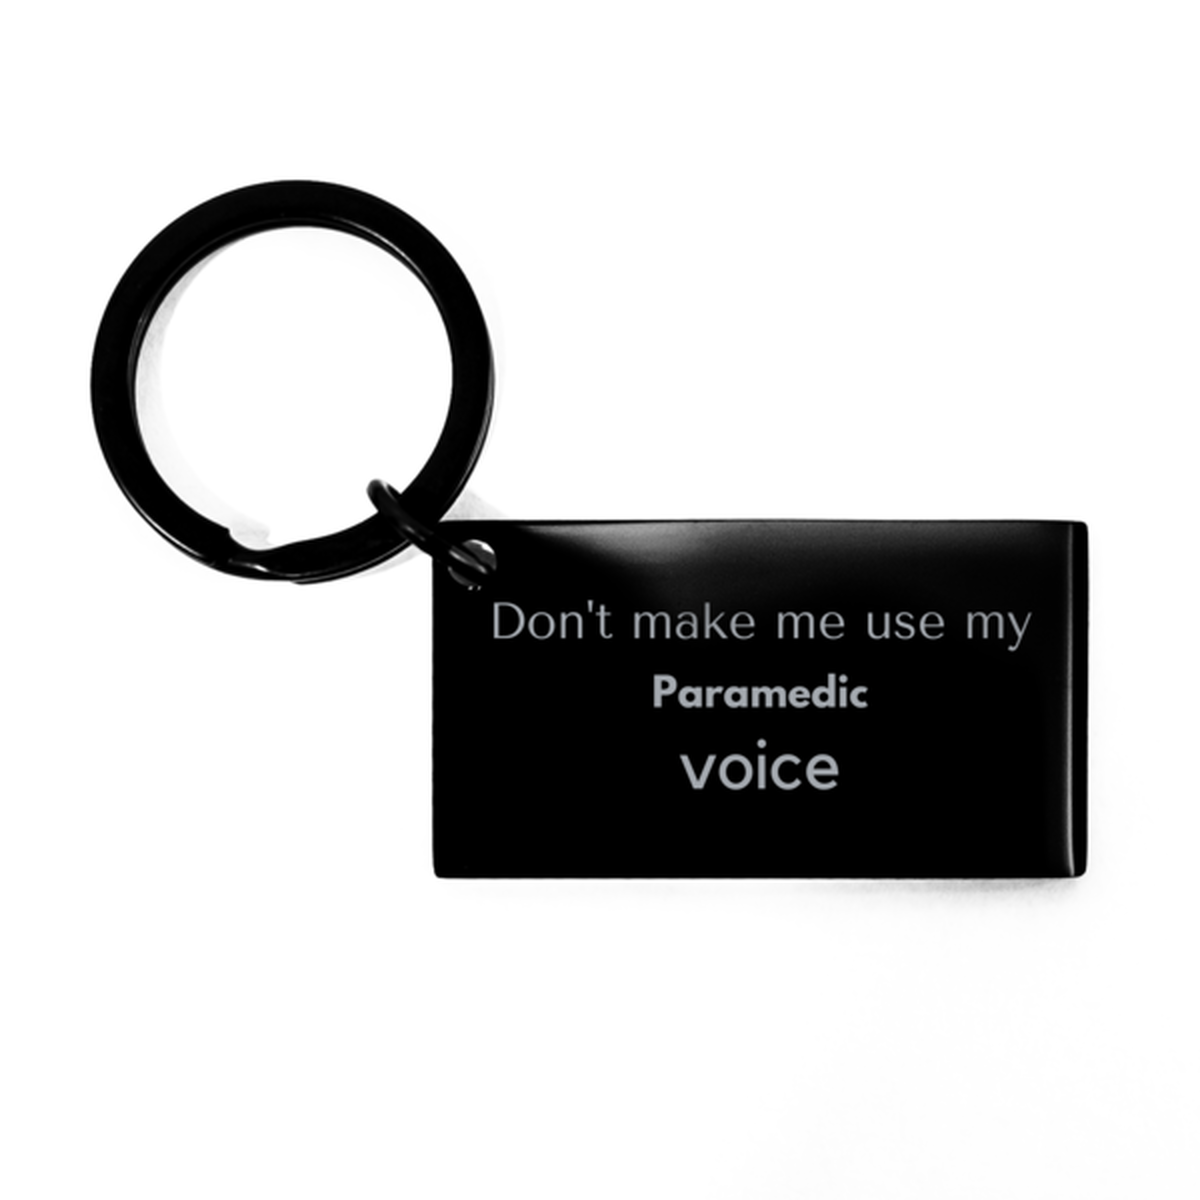 Don't make me use my Paramedic voice, Sarcasm Paramedic Gifts, Christmas Paramedic Keychain Birthday Unique Gifts For Paramedic Coworkers, Men, Women, Colleague, Friends